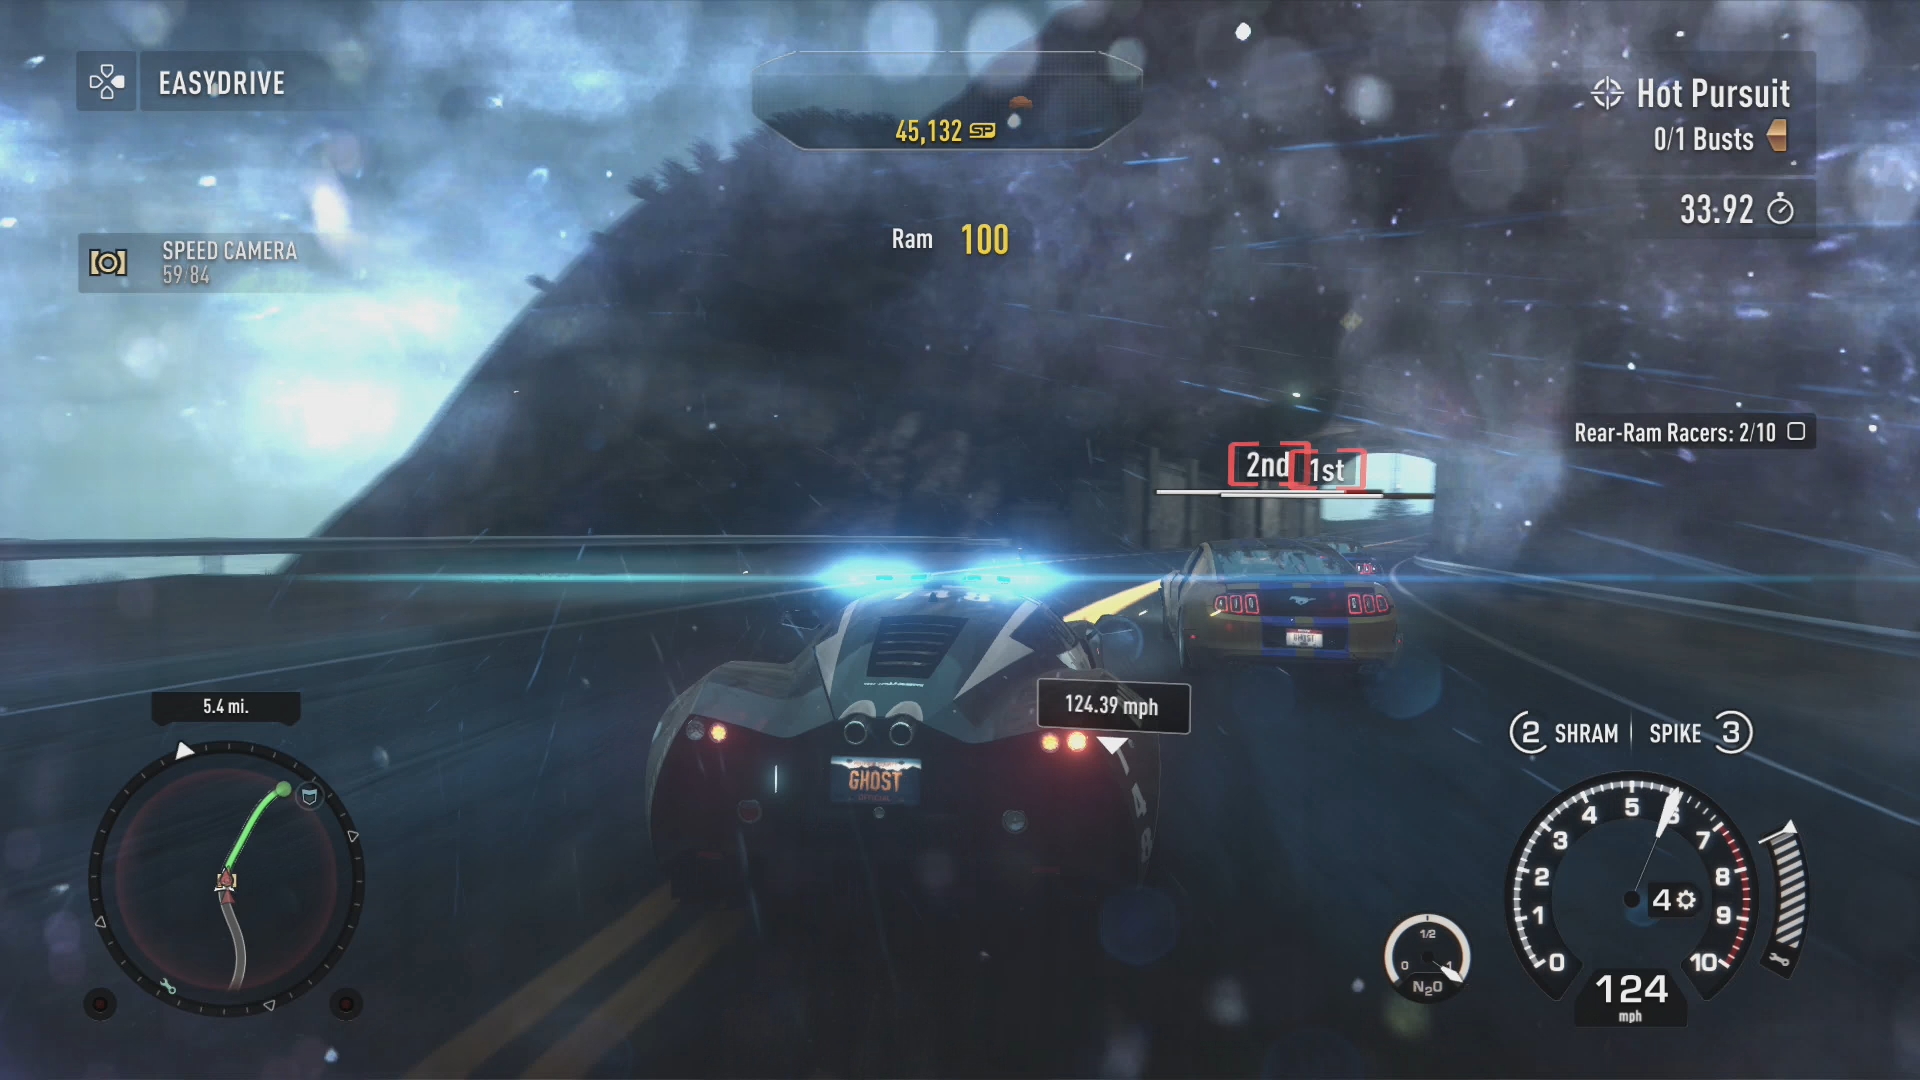 Need for Speed: Rivals hitting PS4 at launch - GameSpot